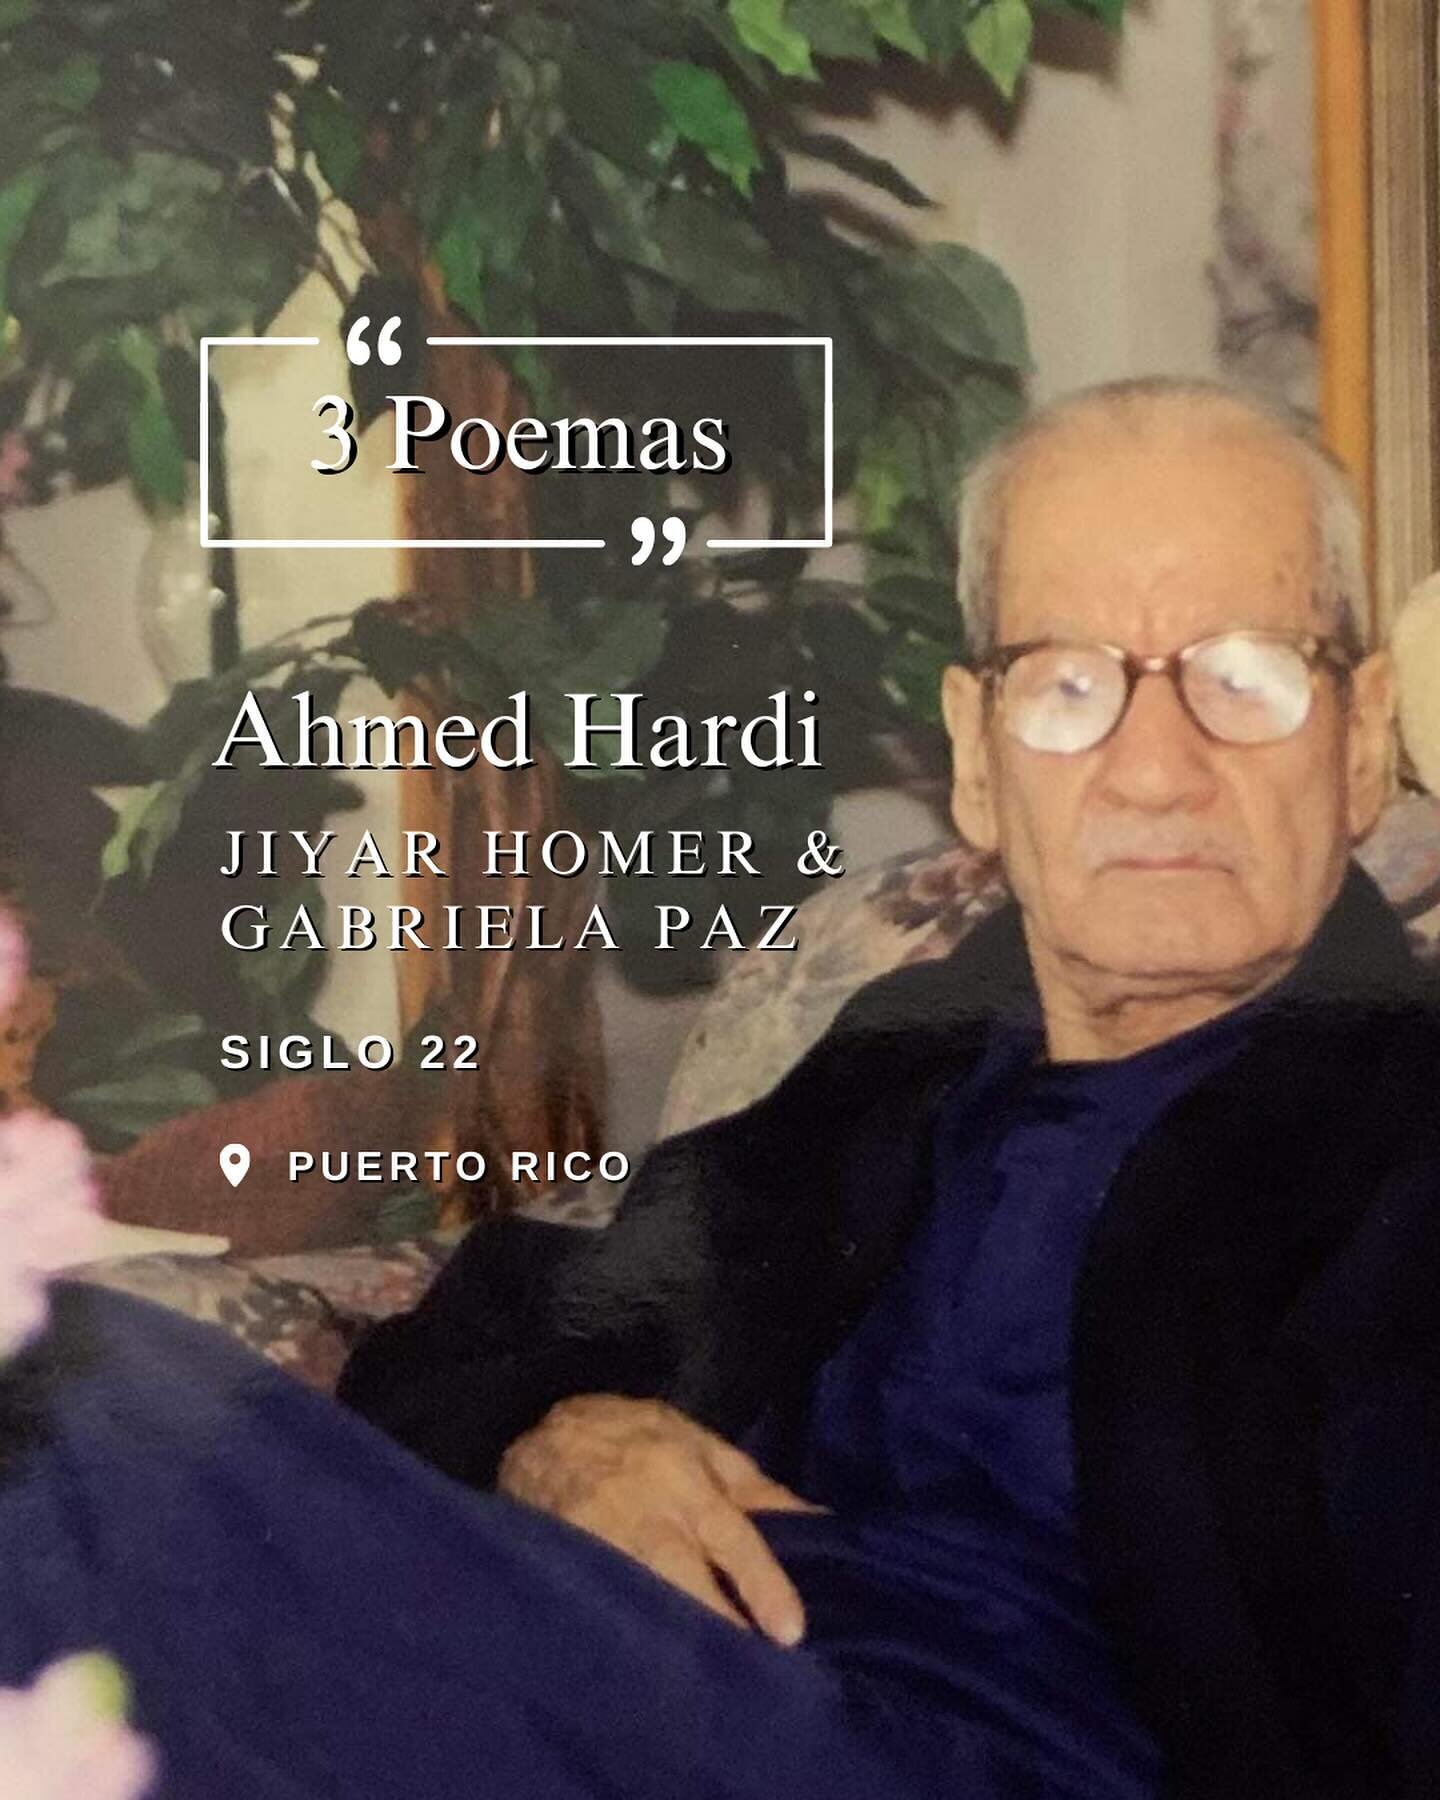 English | العربية | کوردی | Espa&ntilde;ol 

3 poems by Ahmed Hardi were translated into Spanish by Jiyar Homer and Gabriela Paz and published in Siglo 22 in Puerto Rico. 

🔗 Use the link to see the publication and learn more about the poet: https:/